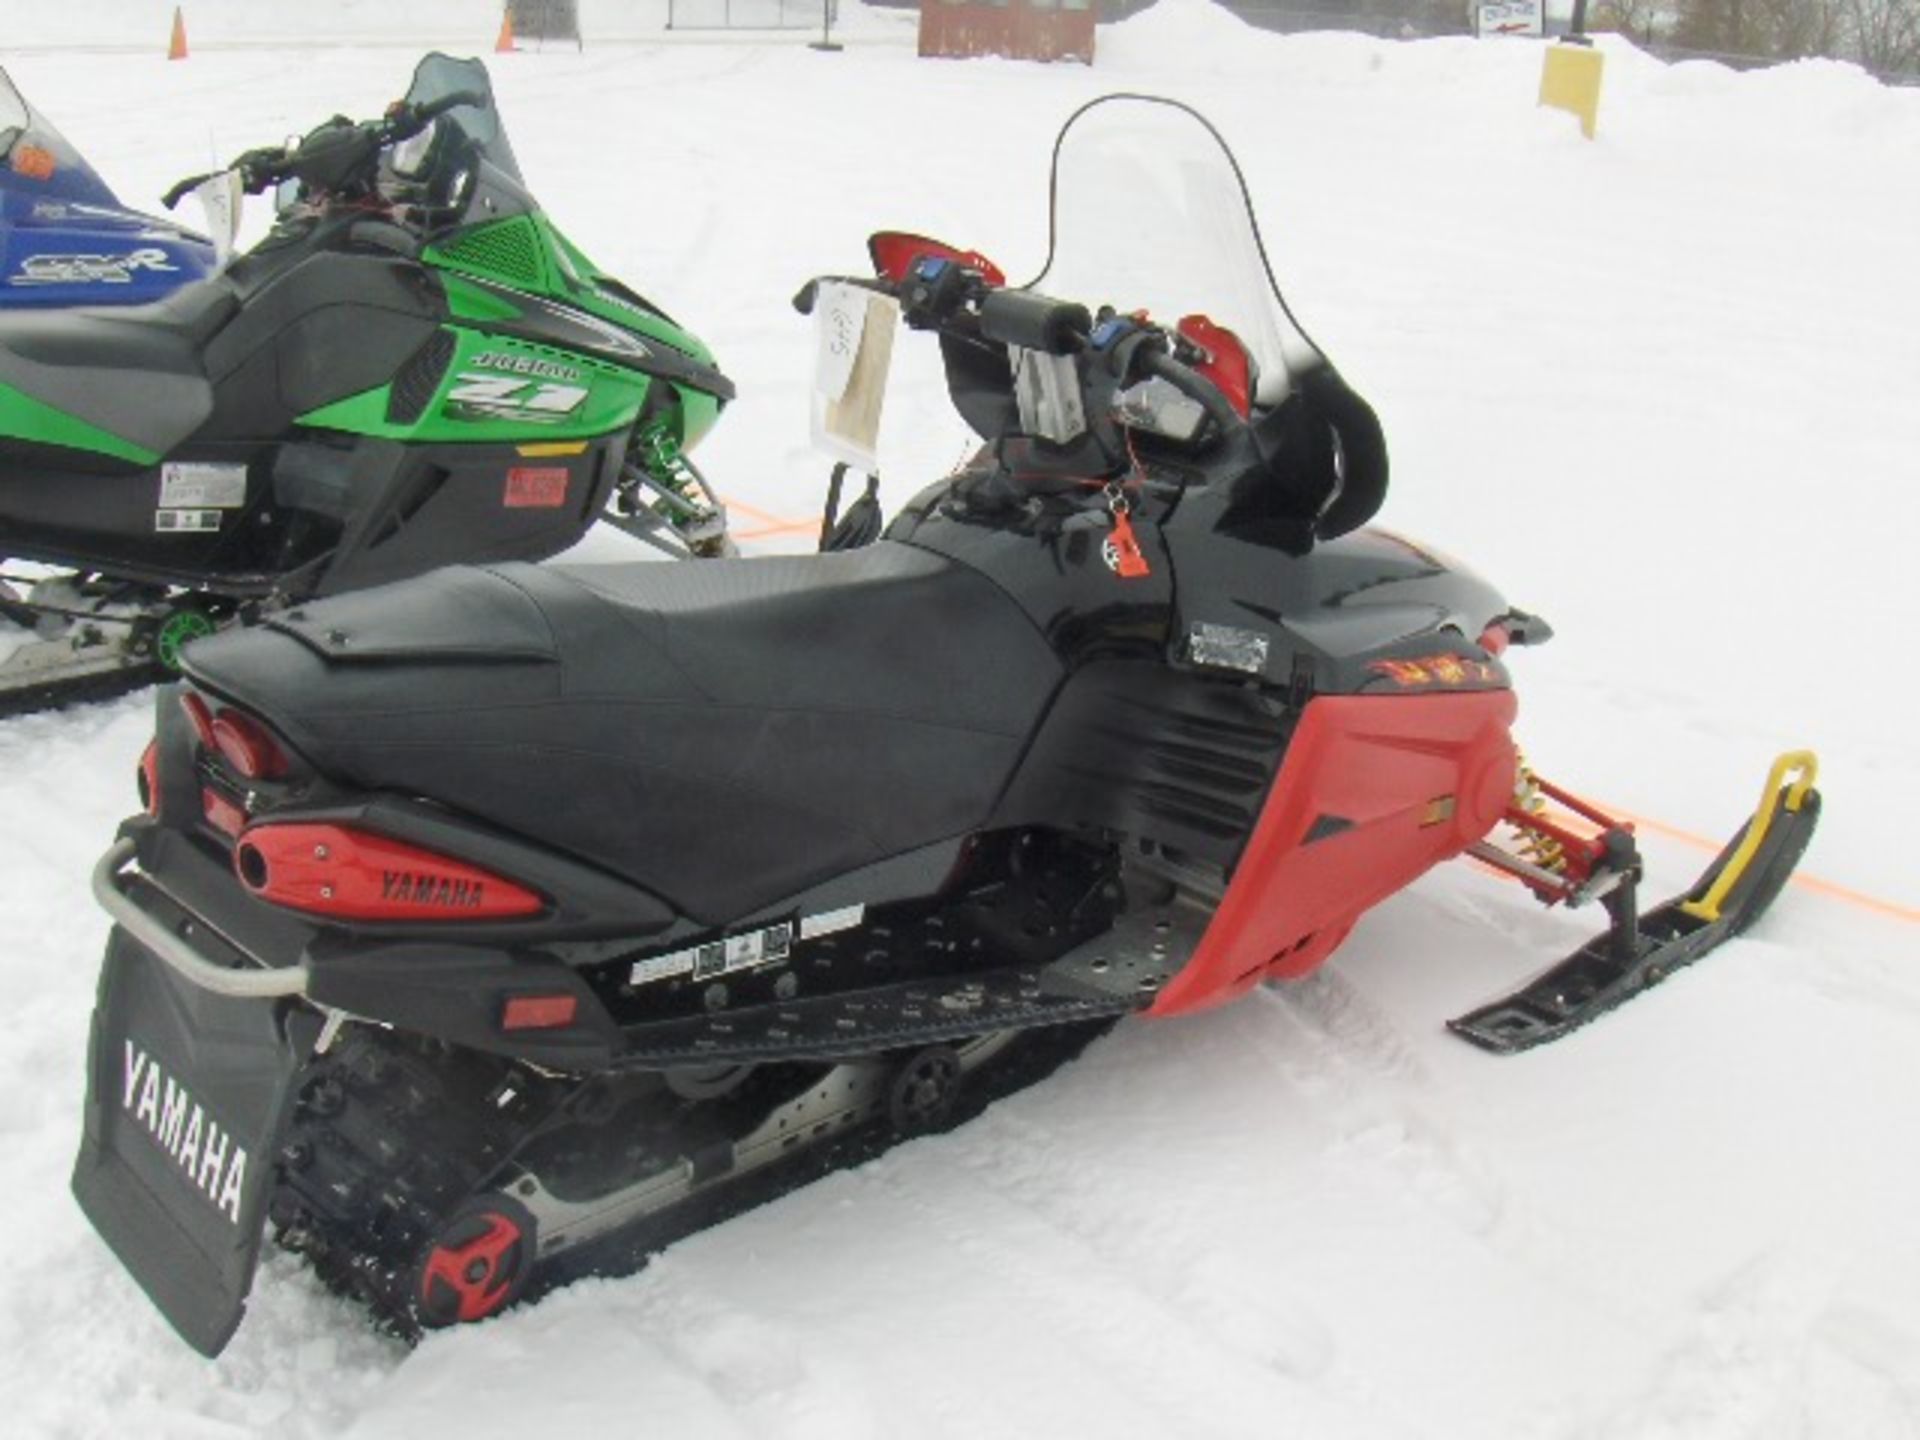 2007 YAMAHA NYTRO  JYE8GH0087A003918 snowmobile, owner started at time of auction check in, electric - Image 3 of 4